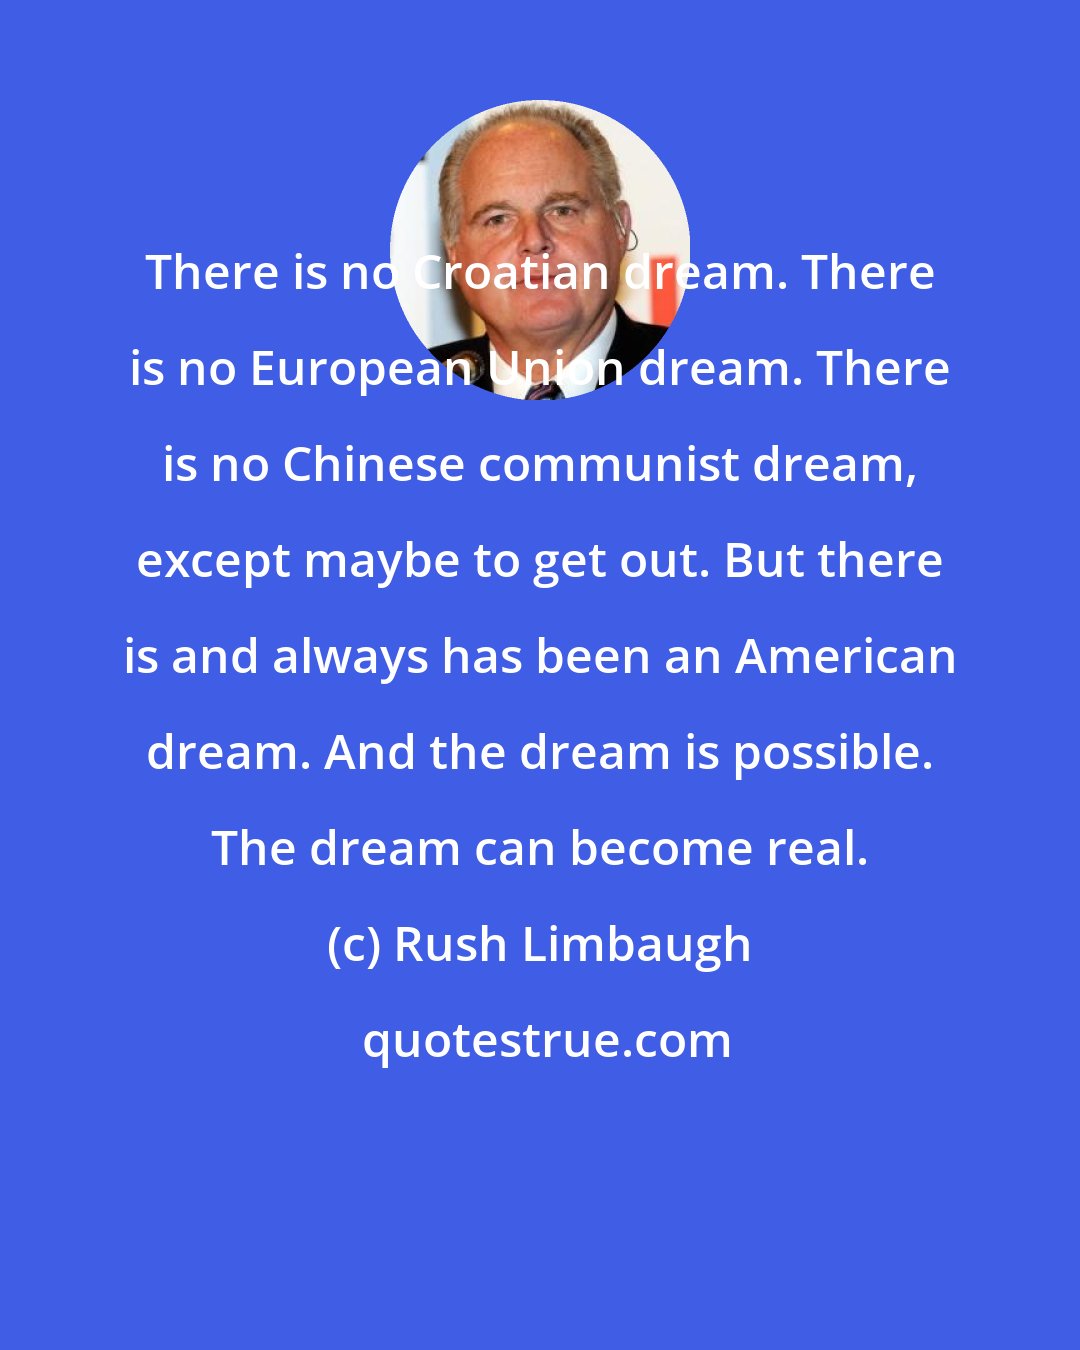 Rush Limbaugh: There is no Croatian dream. There is no European Union dream. There is no Chinese communist dream, except maybe to get out. But there is and always has been an American dream. And the dream is possible. The dream can become real.